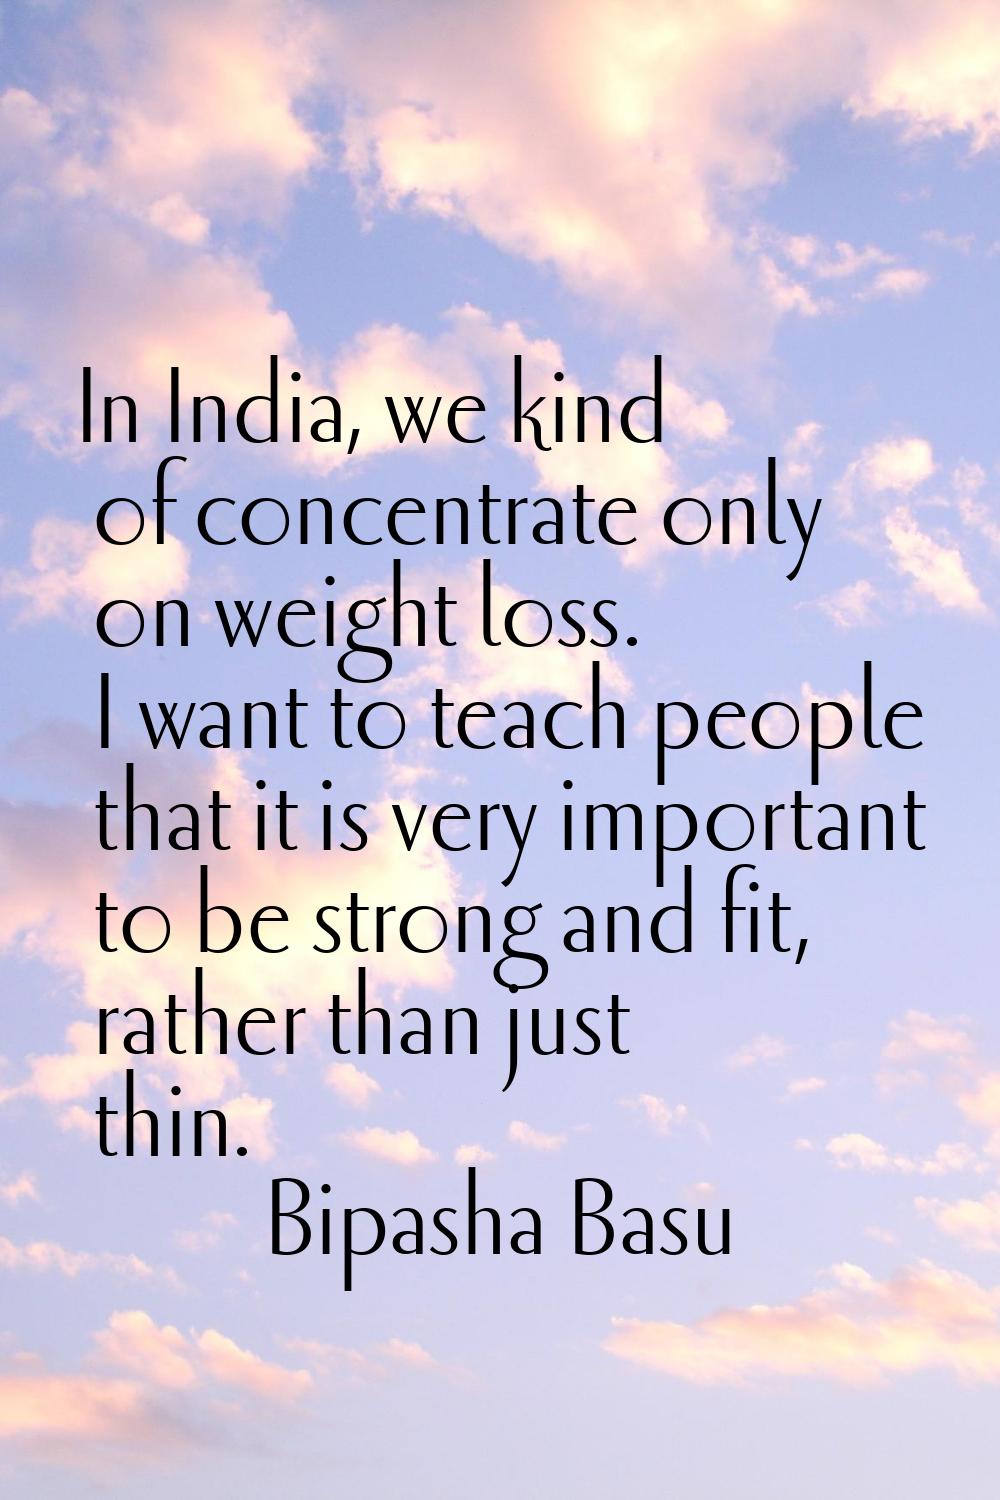 In India, we kind of concentrate only on weight loss. I want to teach people that it is very import